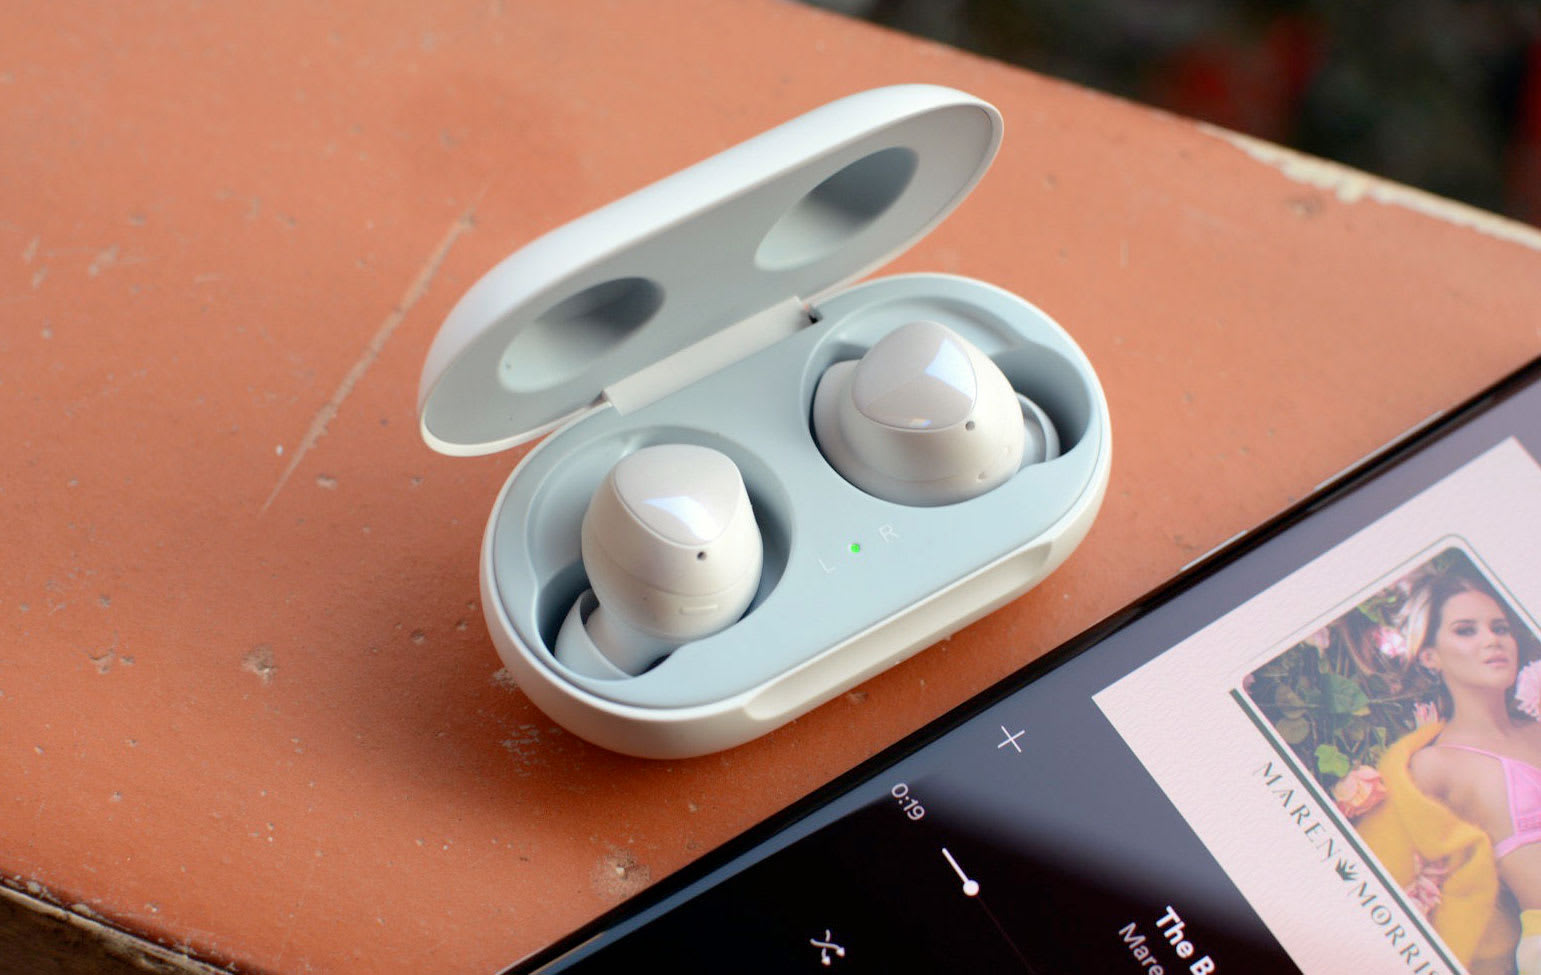 Samsung Galaxy Buds review: A waste of good design